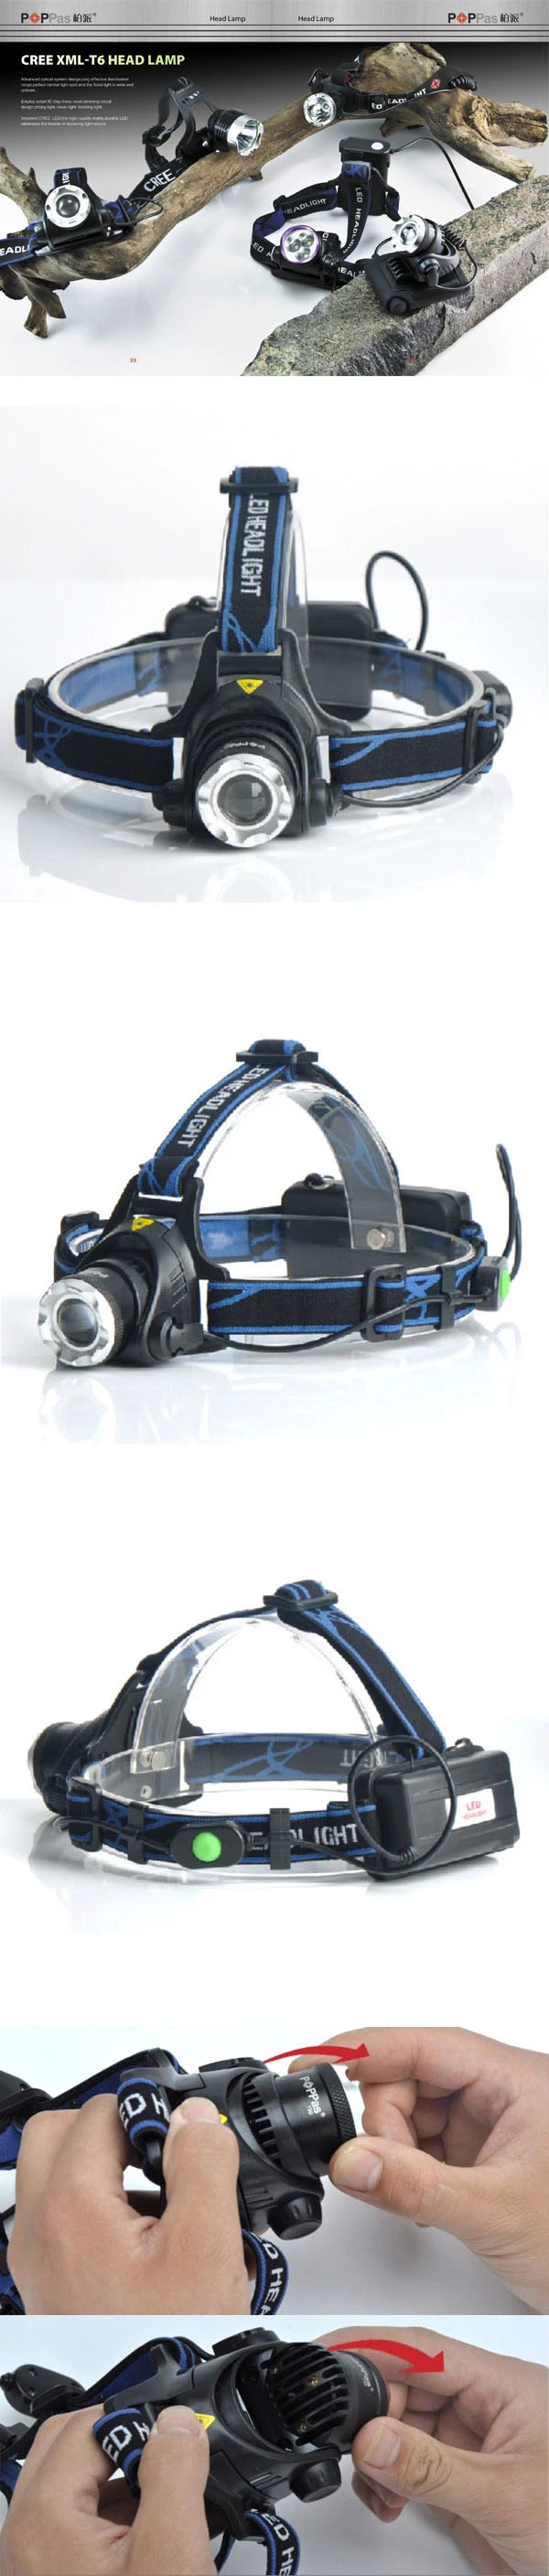 400lm CREE Xm-L T6 Telescopic Zoomable LED Headlamp